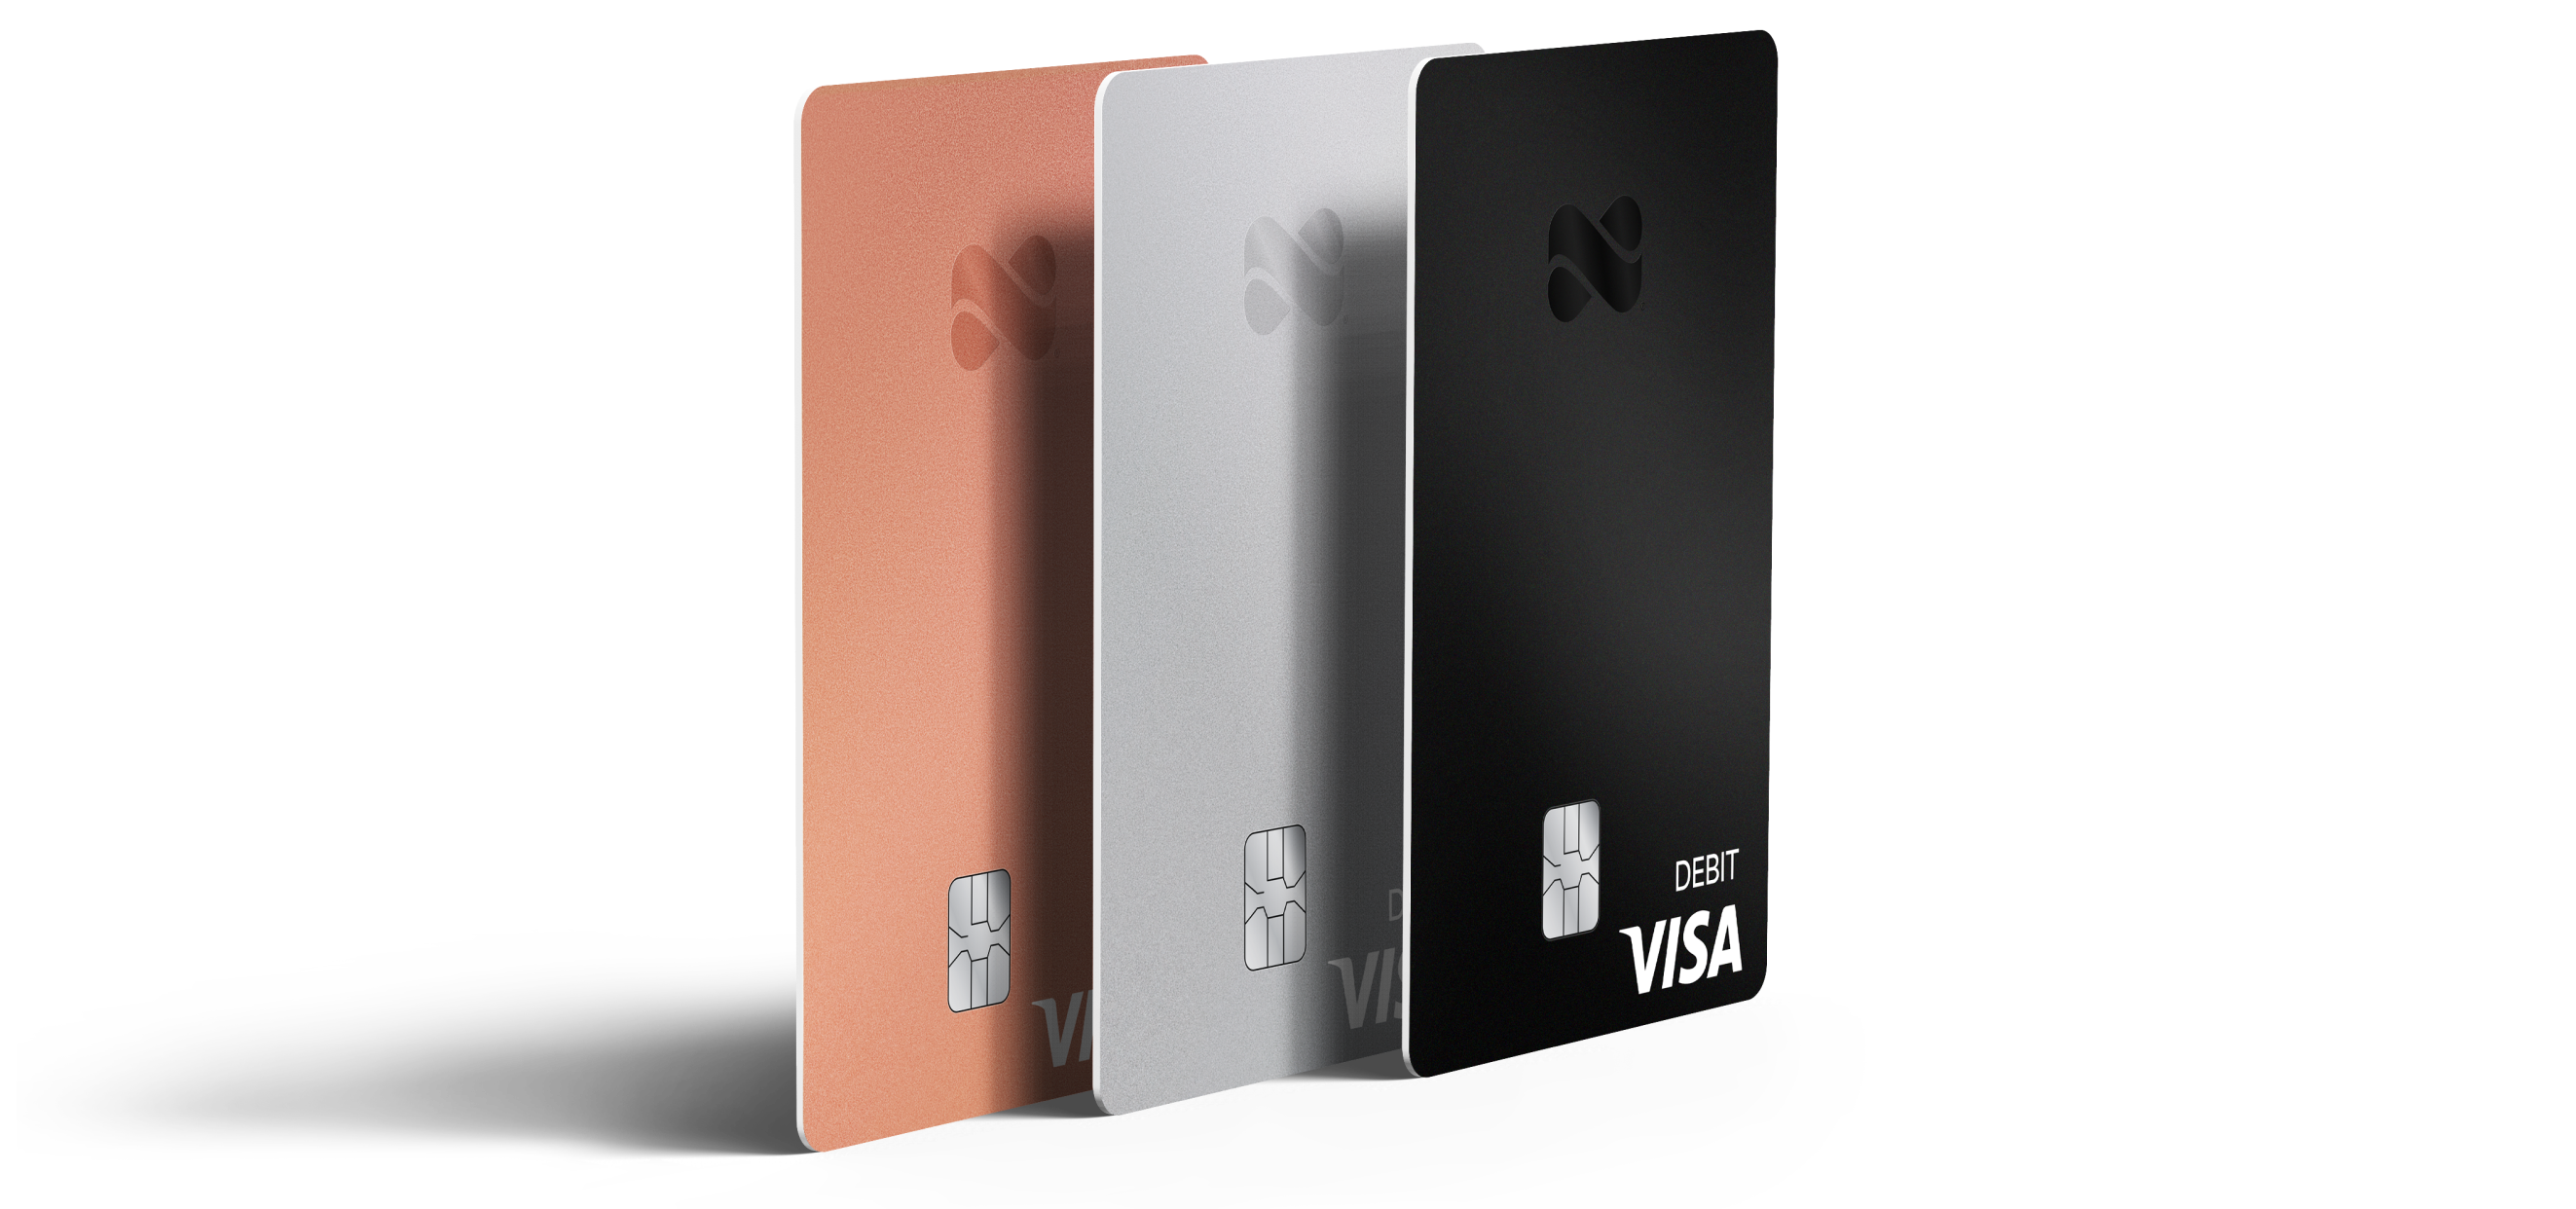 Netspend Debit Card in black, silver, and rose gold